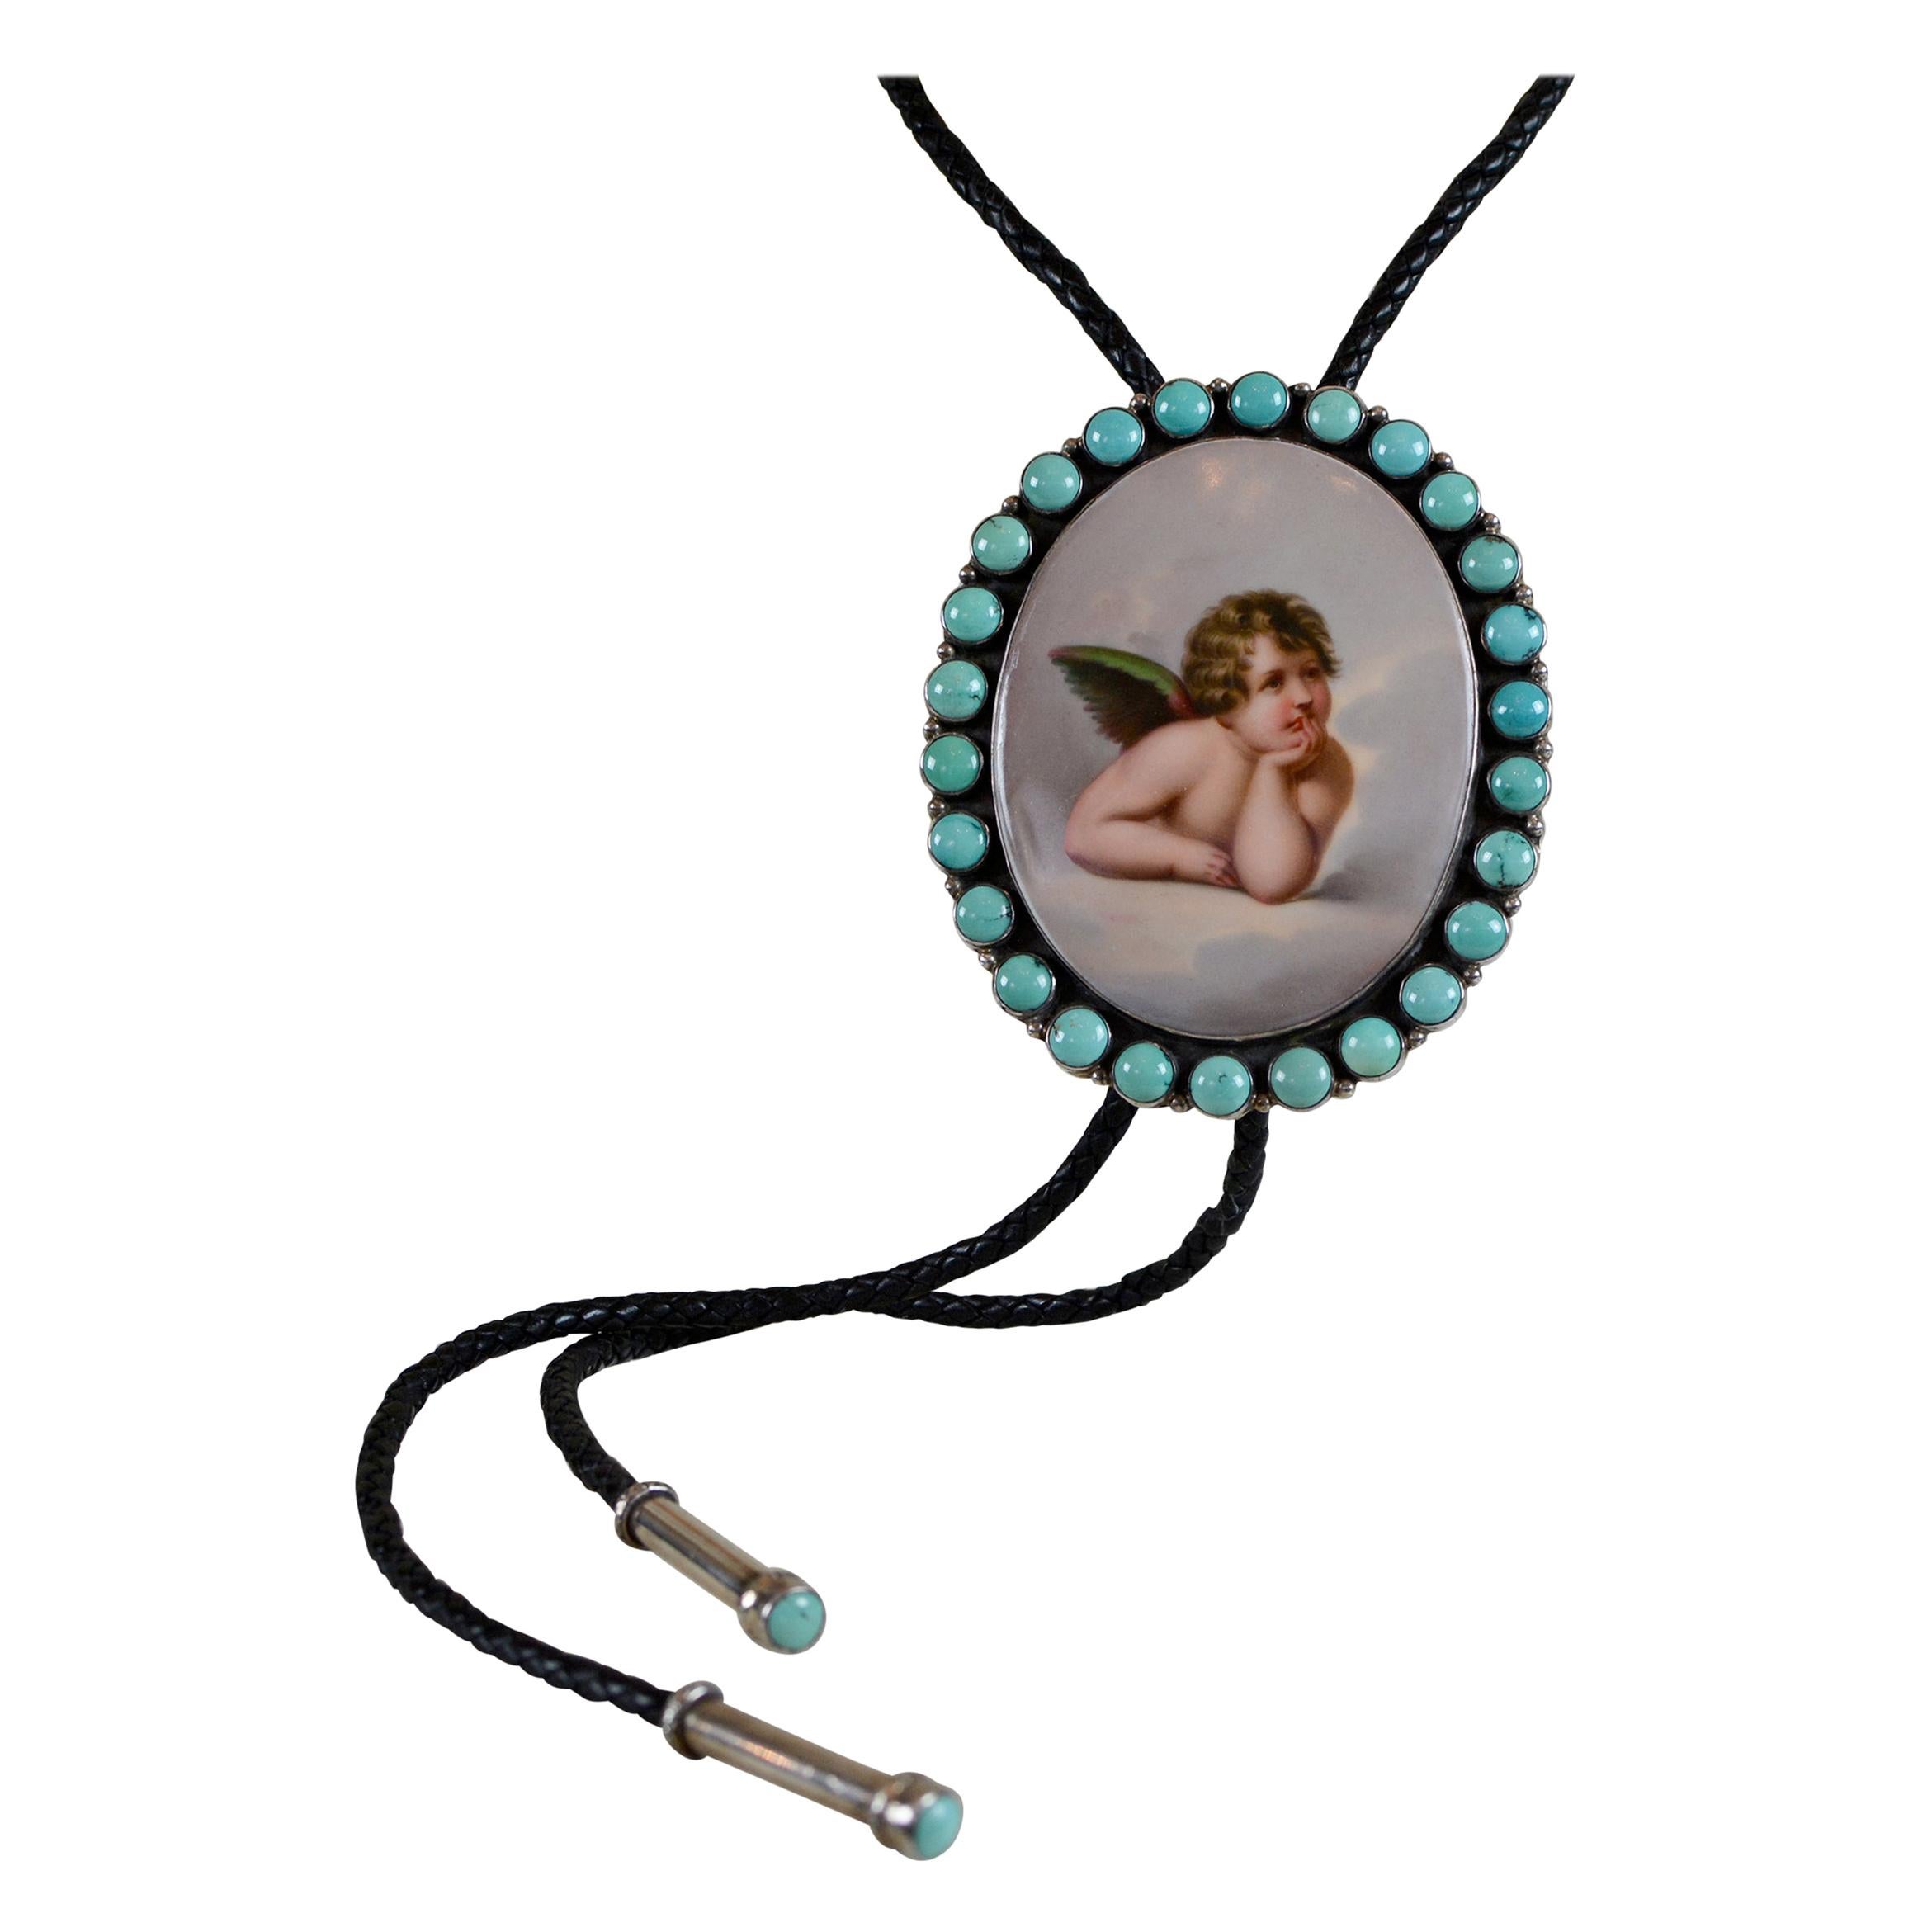 Jill Garber 19th Century Sistine Madonna Angel Portrait with Turquoise Bolo Tie  For Sale